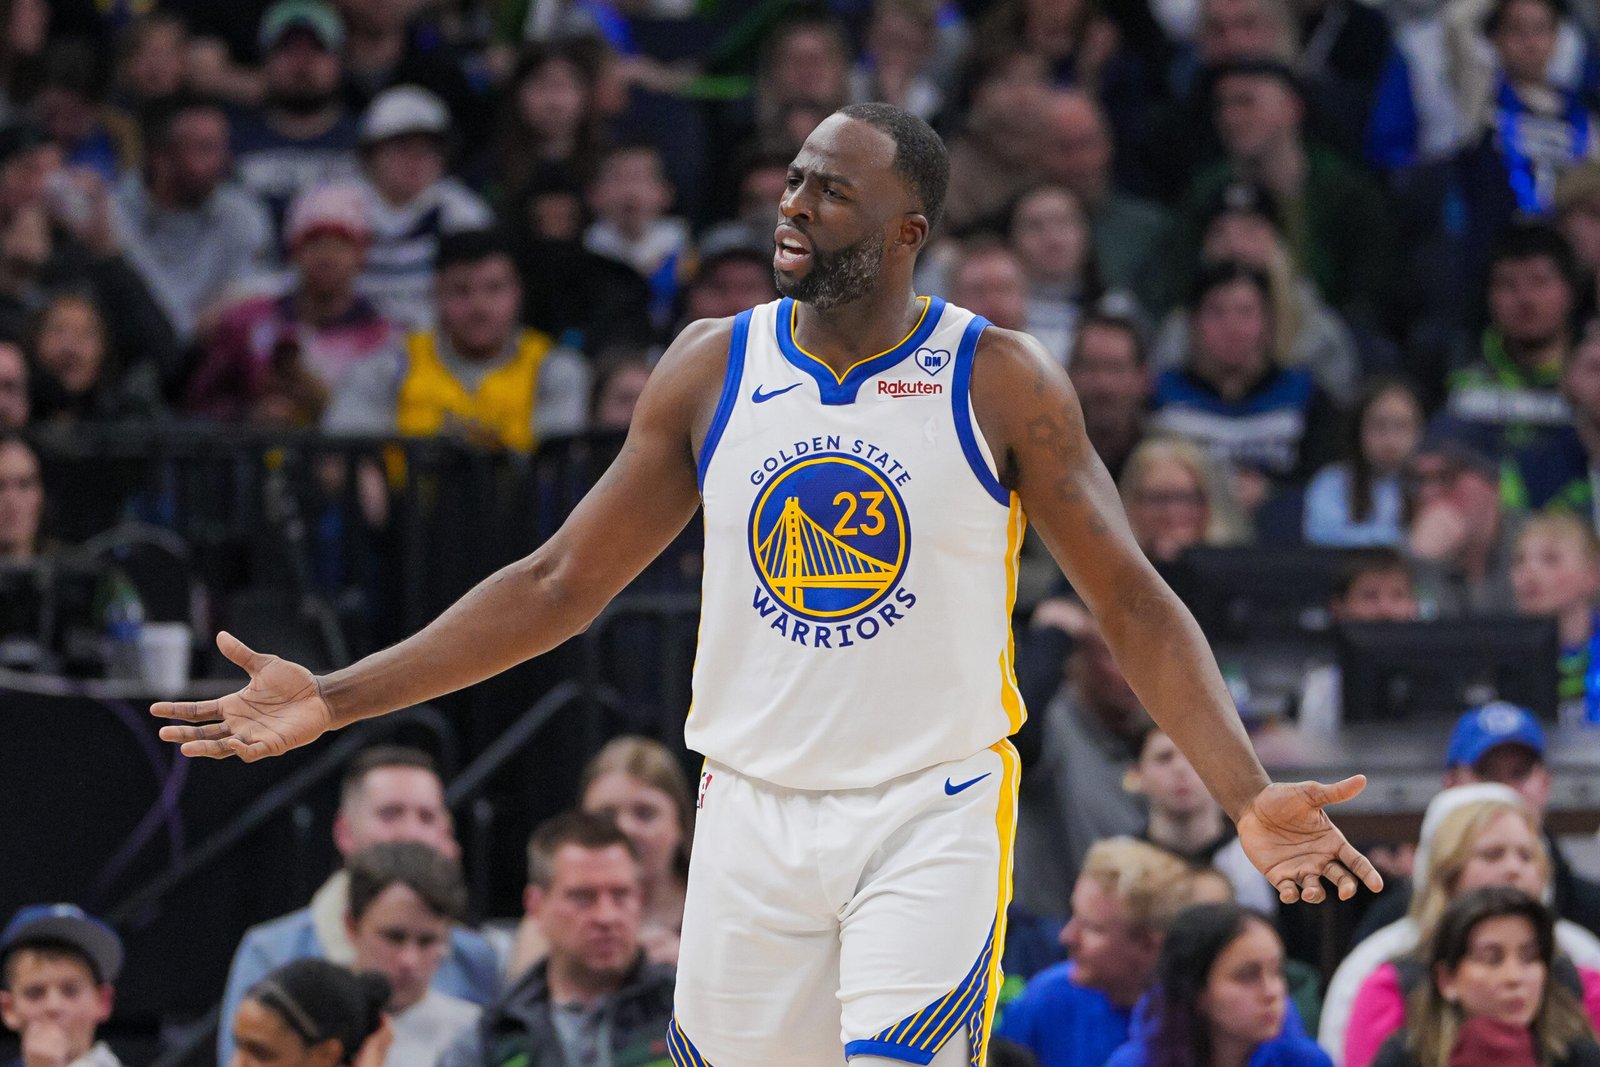 Draymond Green on most recent ejection: ‘It just can’t happen’